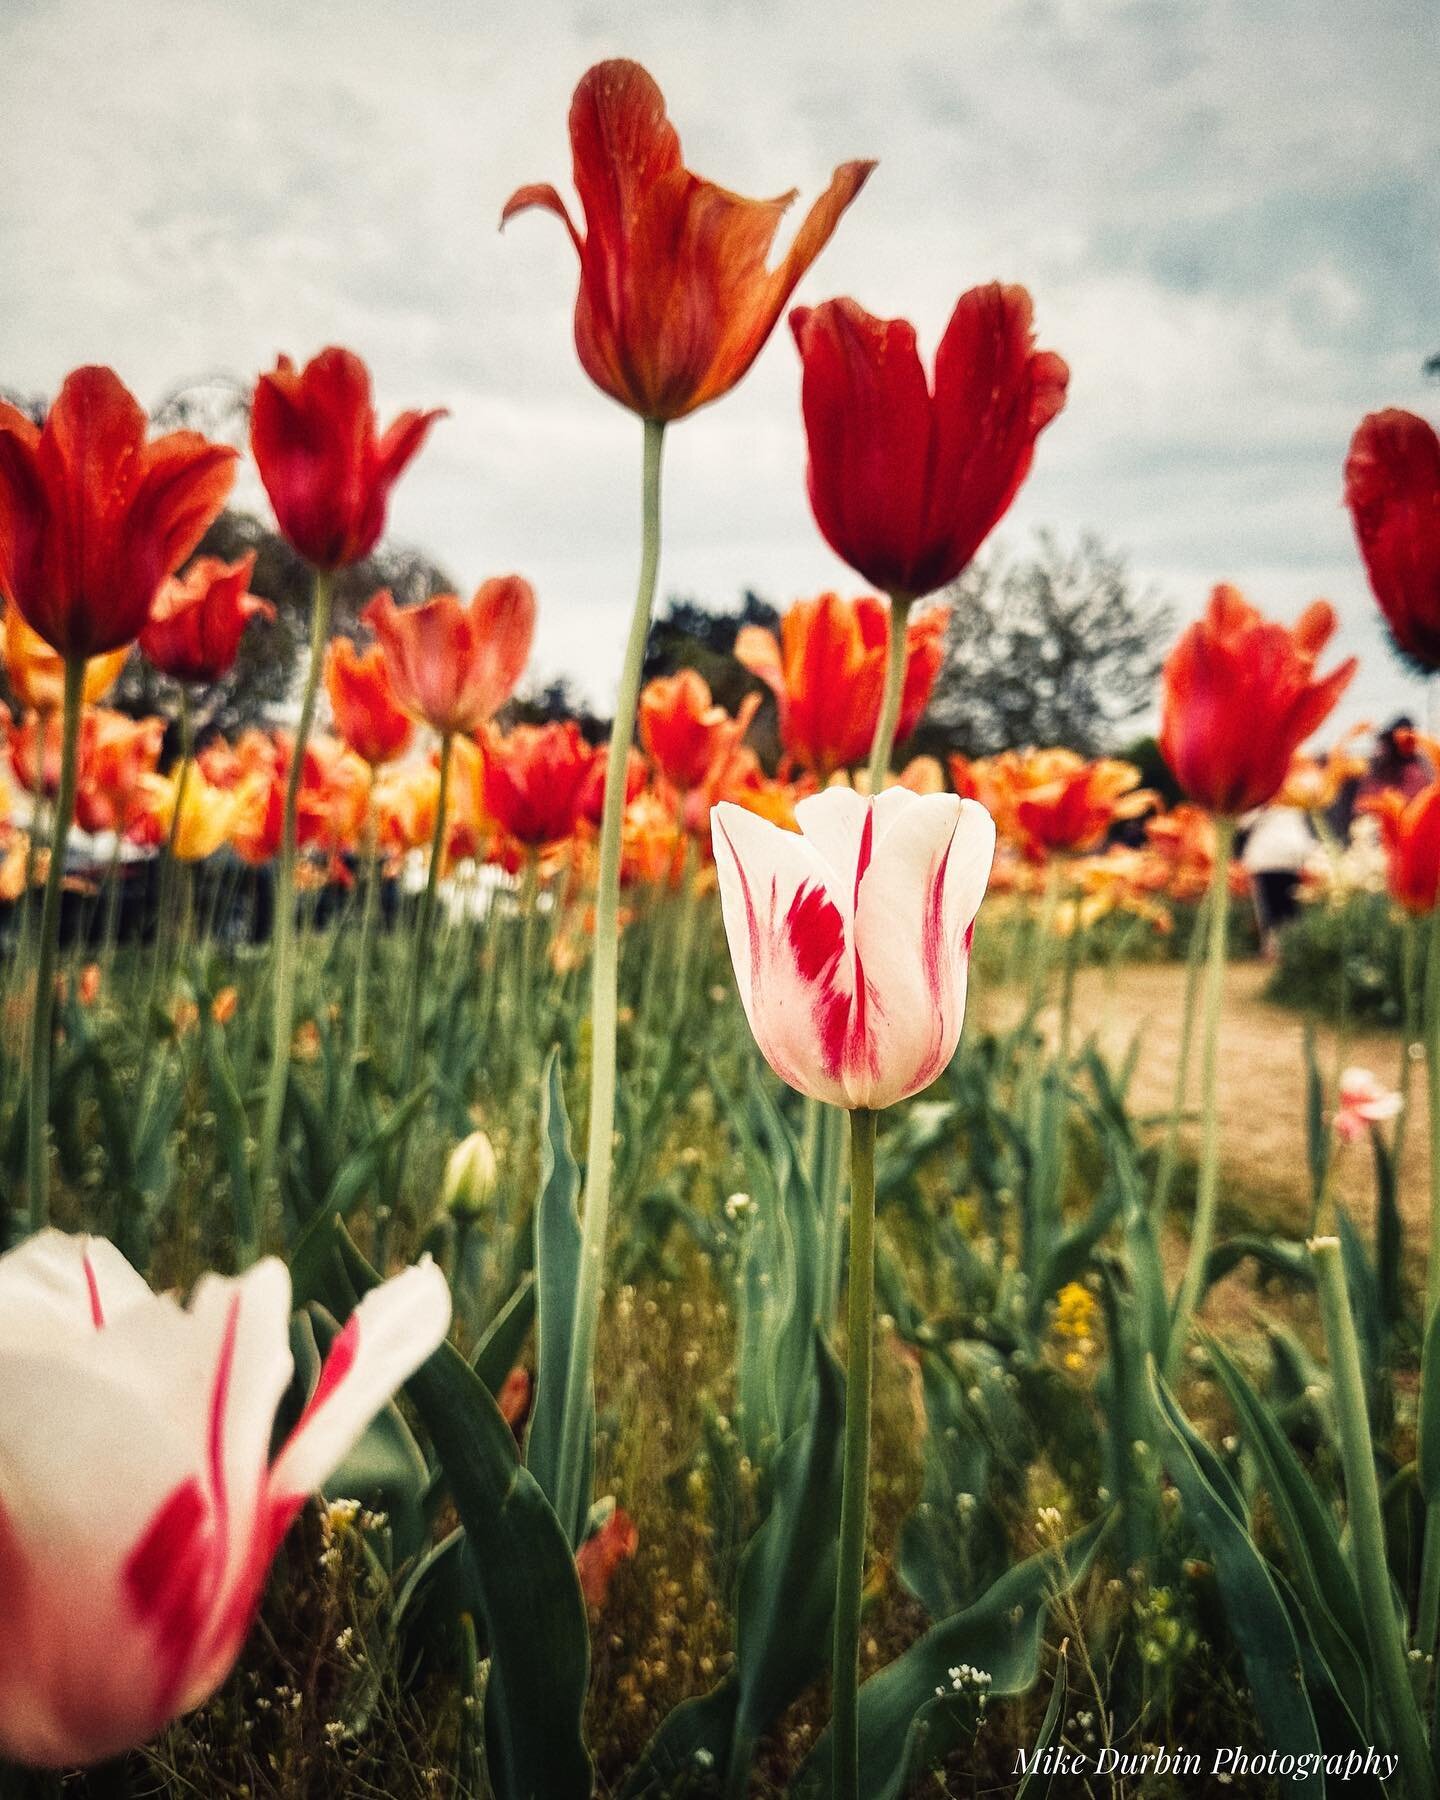 Playing with an image captured today at Window on the Waterfront Park in Holland, Michigan.

#TulipTime
#hollandmichigan 
#windowonthewaterfront 
#puremichigan 
#tulips
#redandwhitetulips 
#springflowers 
#flowerphotography 
#tulipgarden 
#garden 
#f